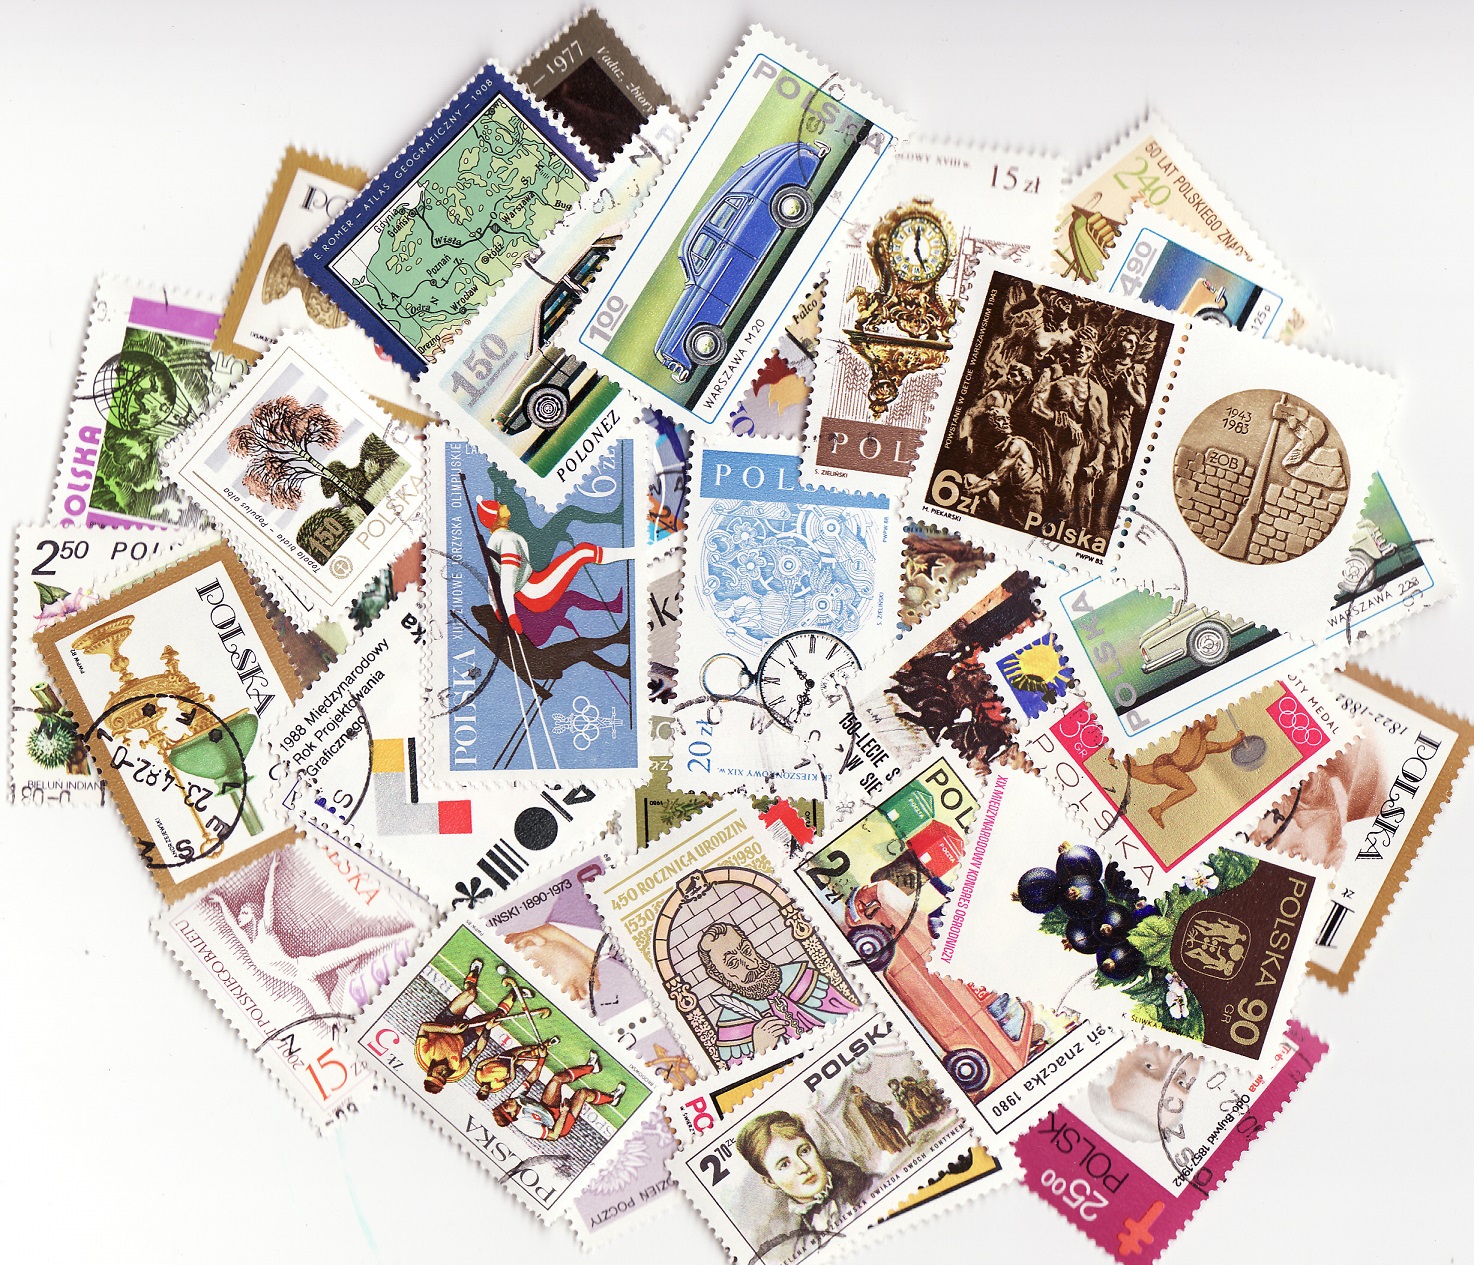  Poland Pictorial Stamp Packet,  100 different stamps from Poland